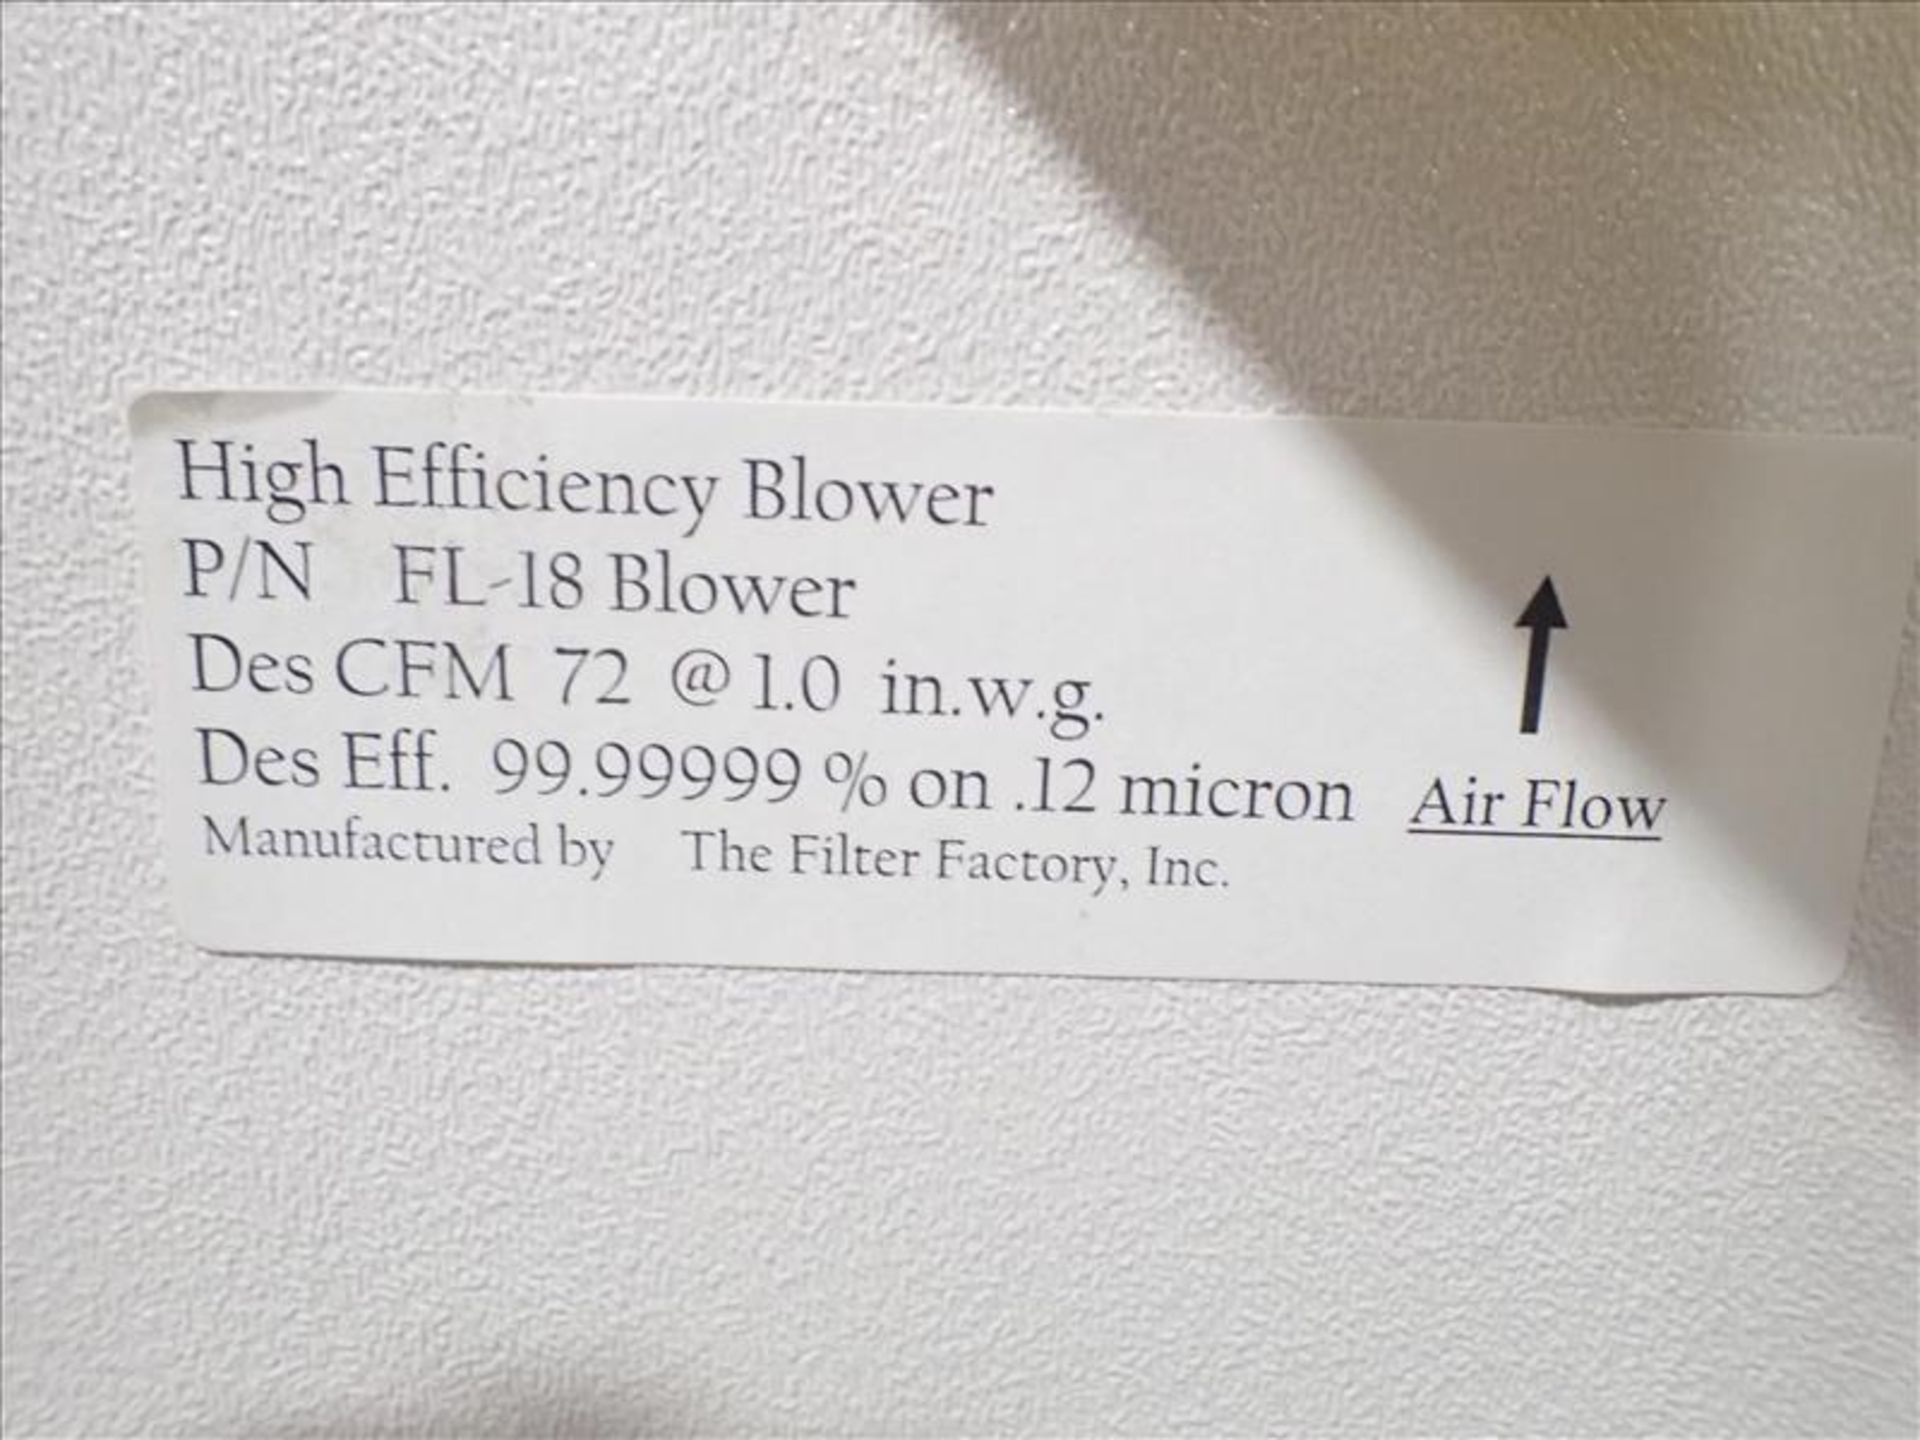 FilterFactory high efficiency blower, mod. FL-18, 0.12 micron - Image 2 of 3